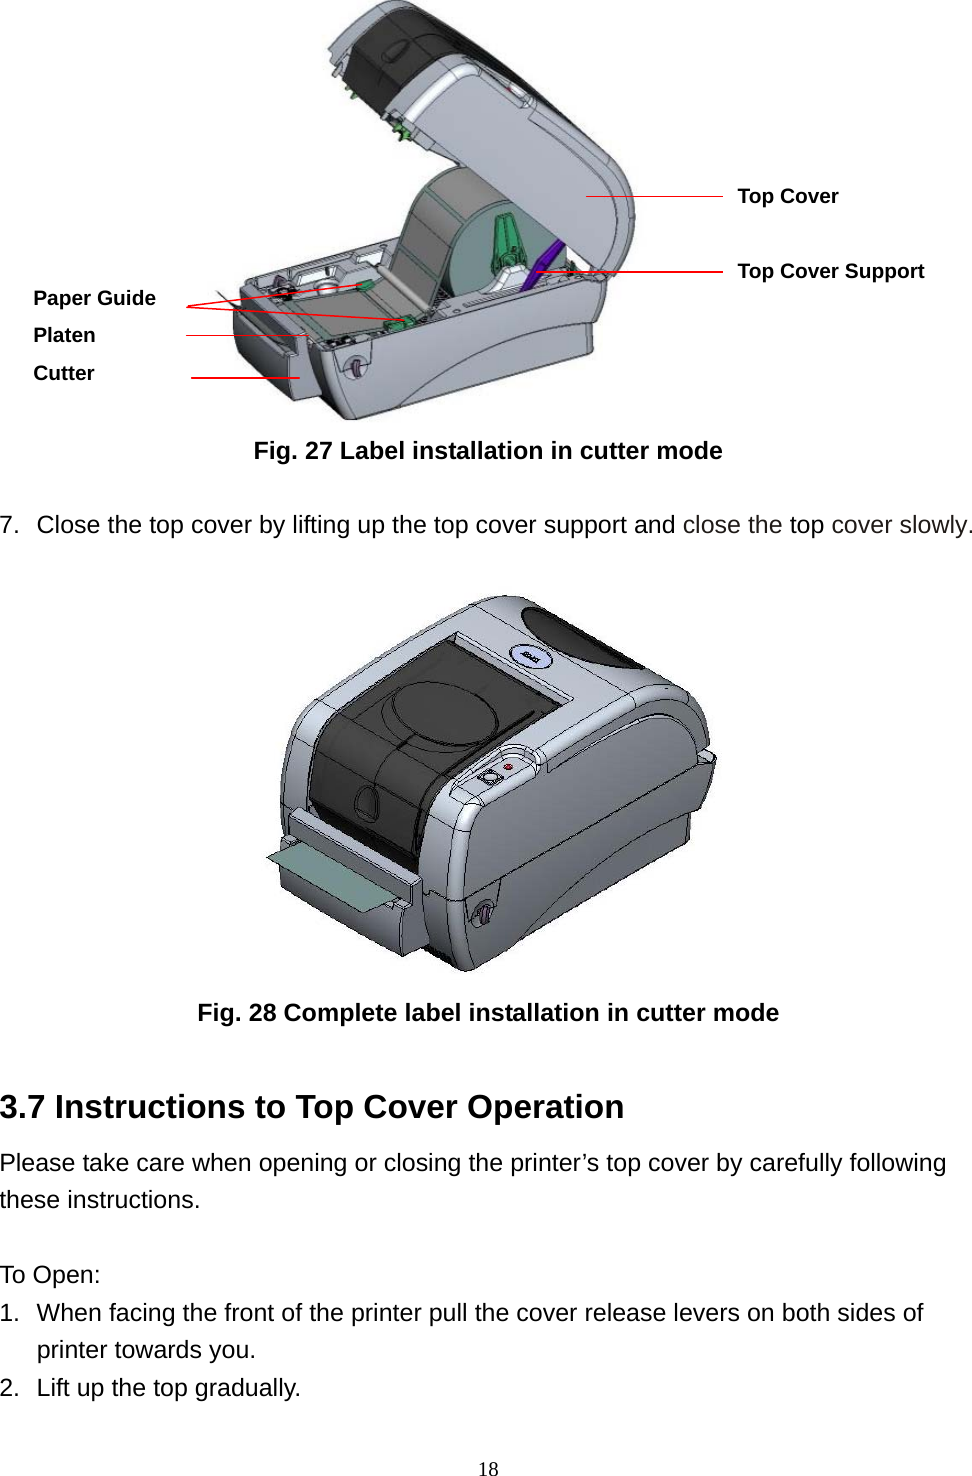  18                  Fig. 27 Label installation in cutter mode  7.  Close the top cover by lifting up the top cover support and close the top cover slowly.  Fig. 28 Complete label installation in cutter mode  3.7 Instructions to Top Cover Operation Please take care when opening or closing the printer’s top cover by carefully following these instructions.  To Open: 1.  When facing the front of the printer pull the cover release levers on both sides of printer towards you. 2.  Lift up the top gradually. Top Cover  Top Cover Support Paper Guide Platen Cutter 